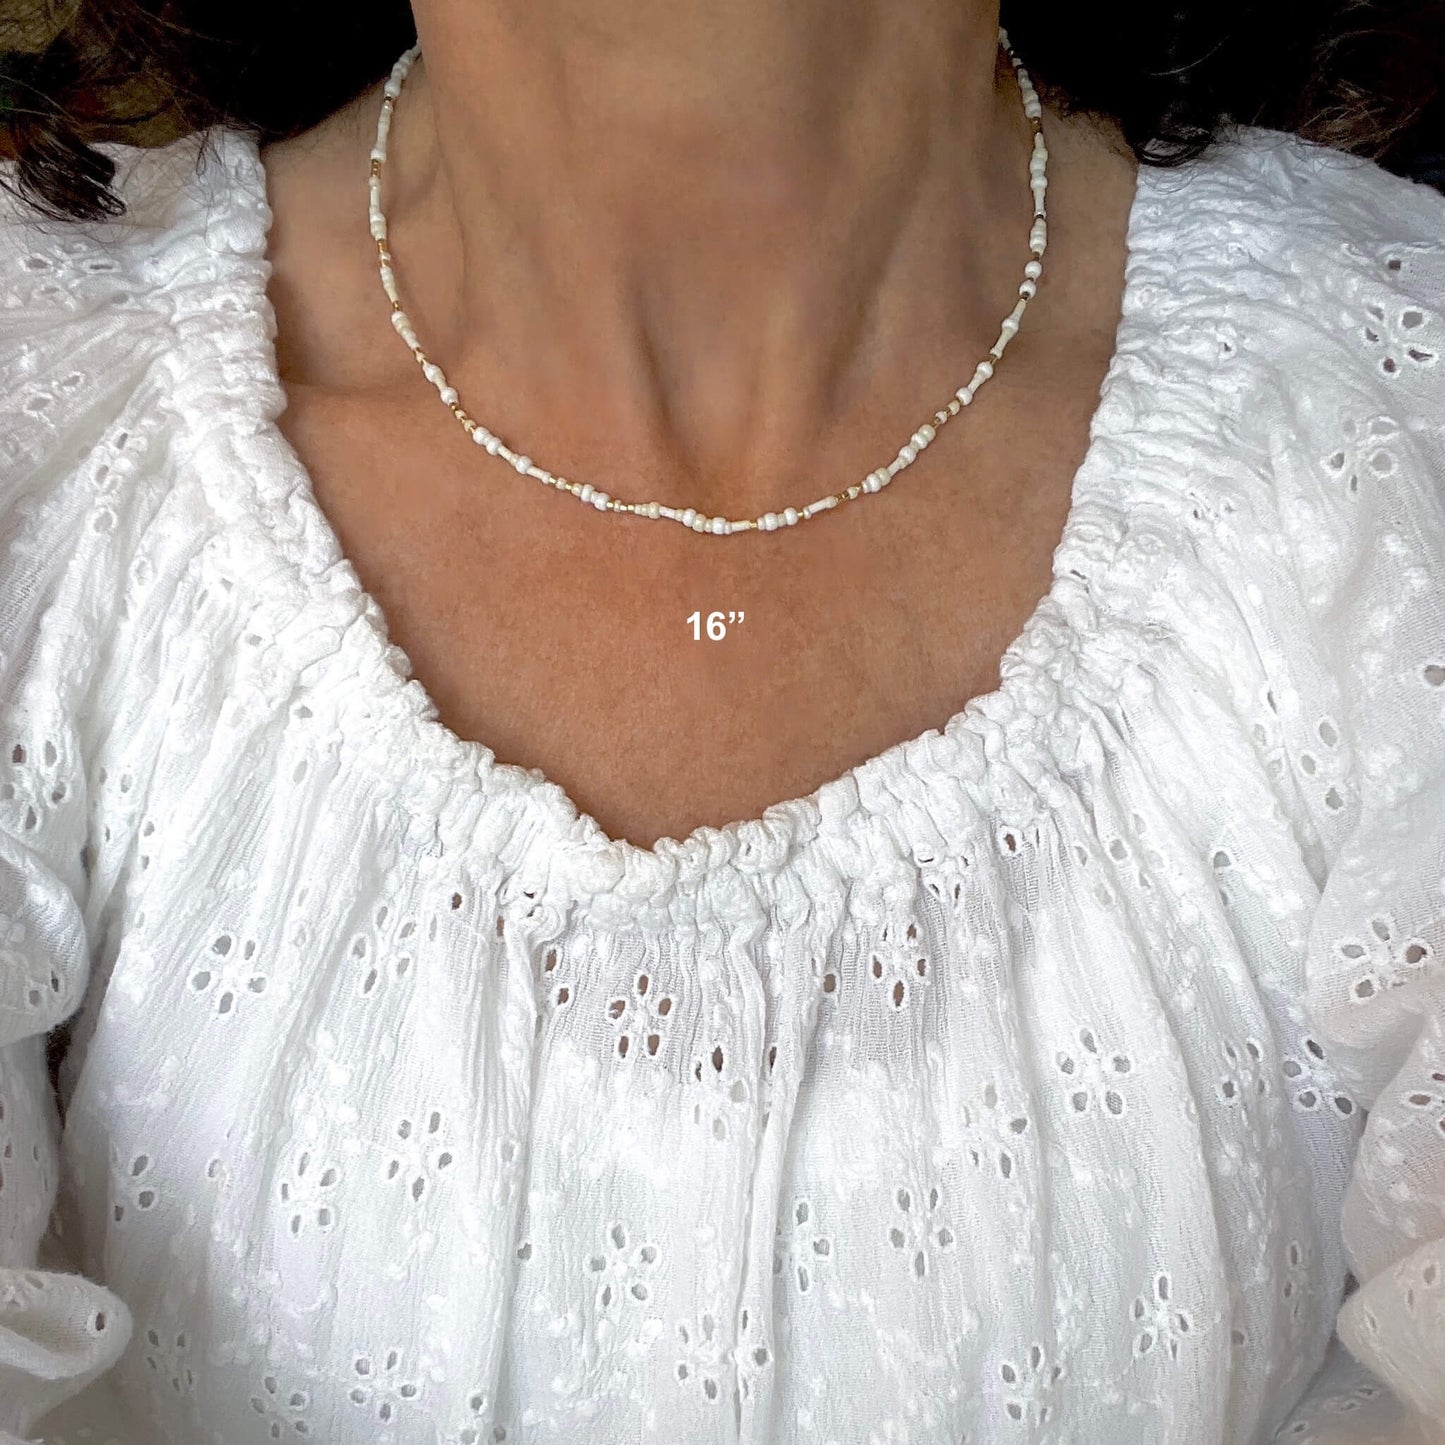 White and ivory 16" seed bead choker stretch necklace with gold-tone accents.